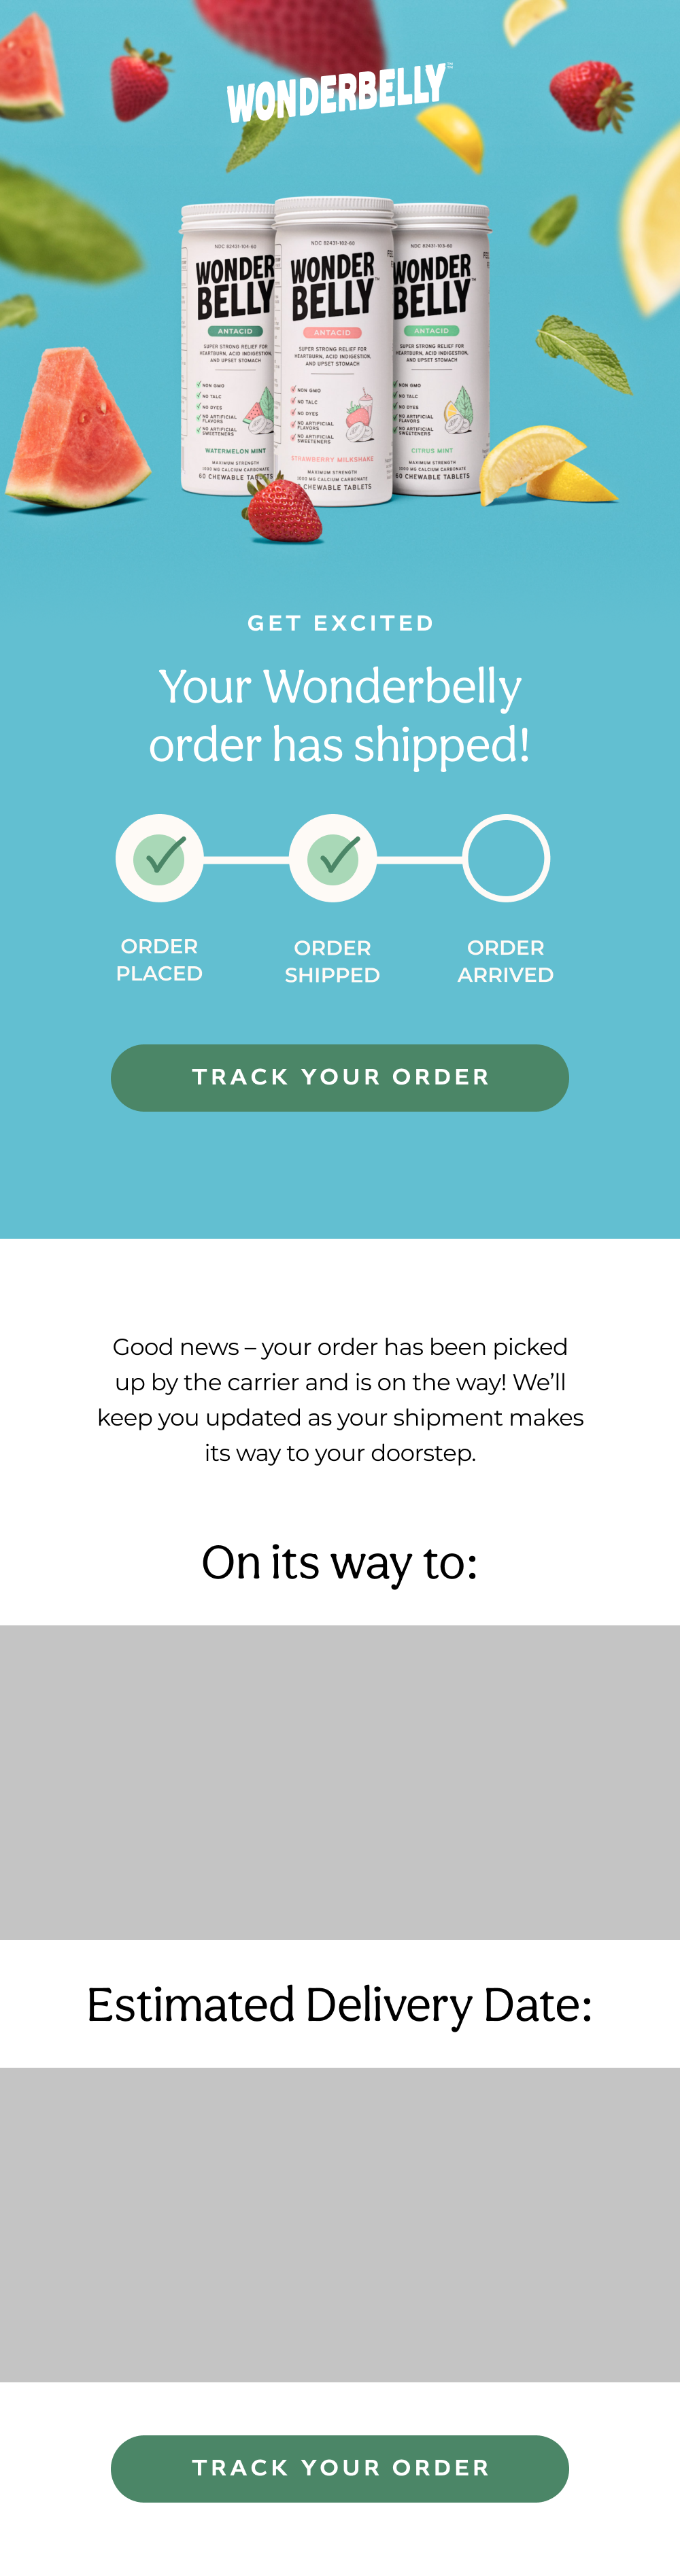 Wonderbelly Shipment Created Industry Email Template screenshot